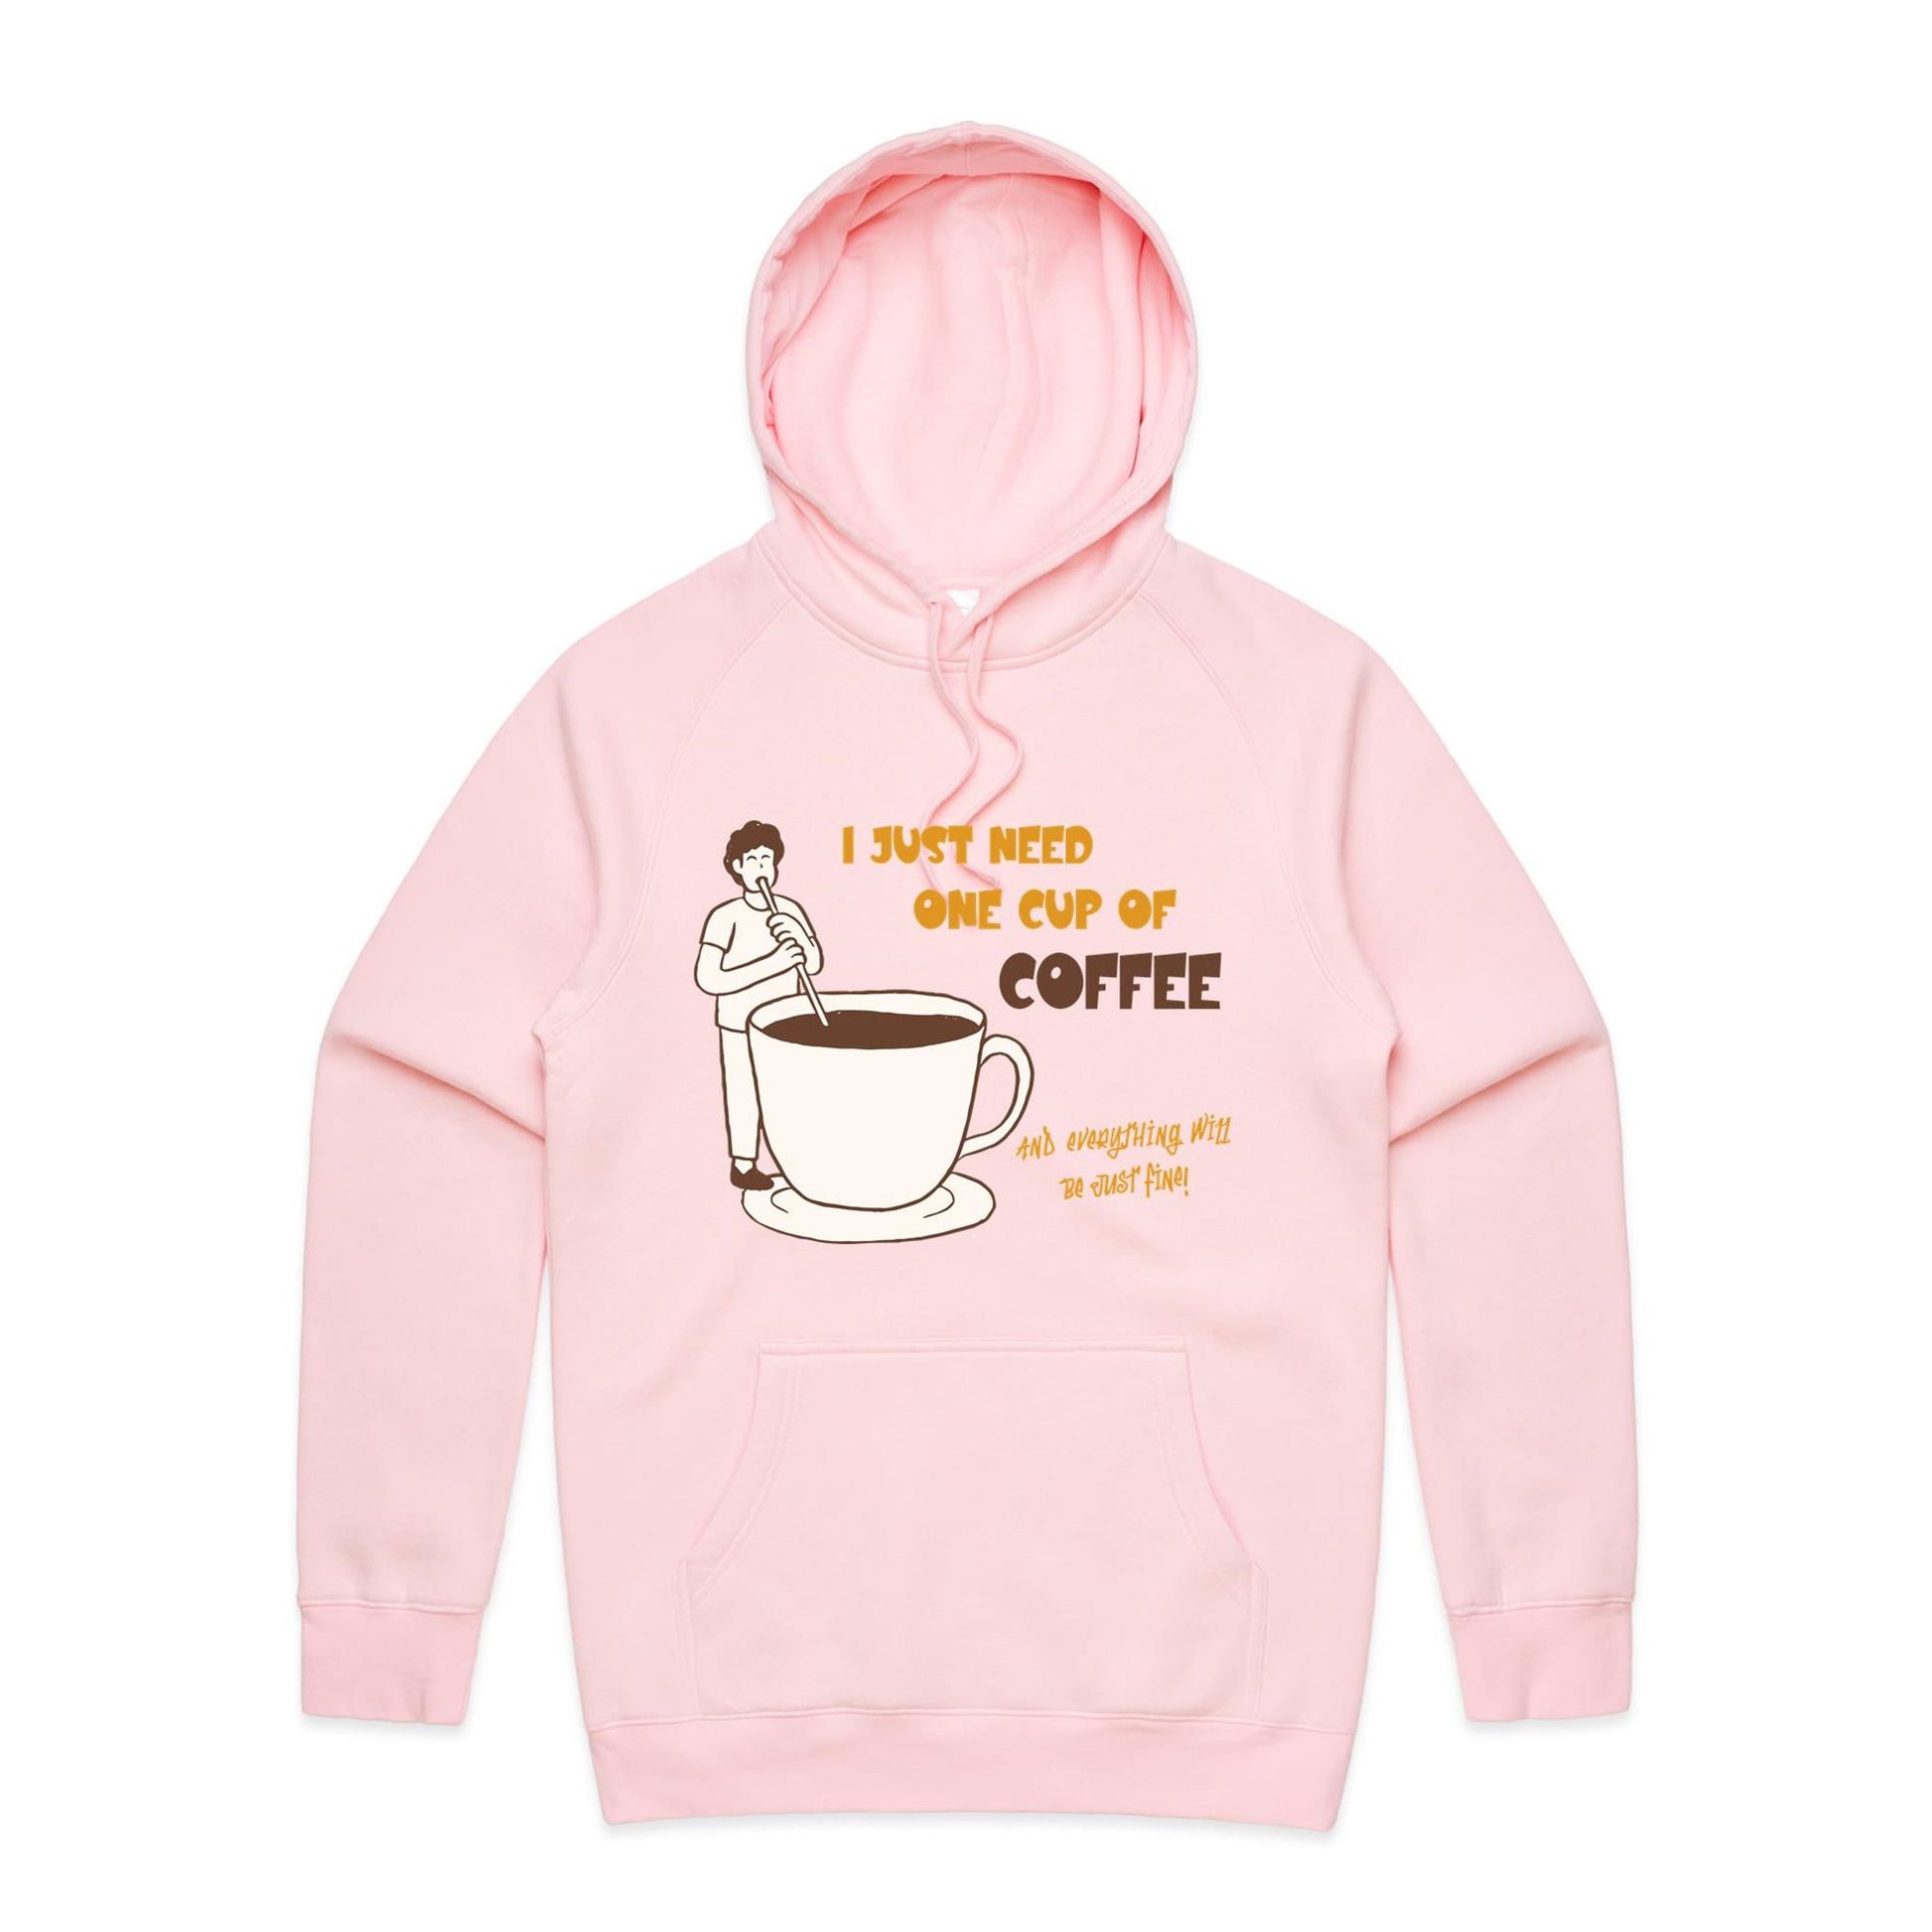 I Just Need One Cup Of Coffee And Everything Will Be Just Fine - Supply Hood Pink Mens Supply Hoodie Coffee